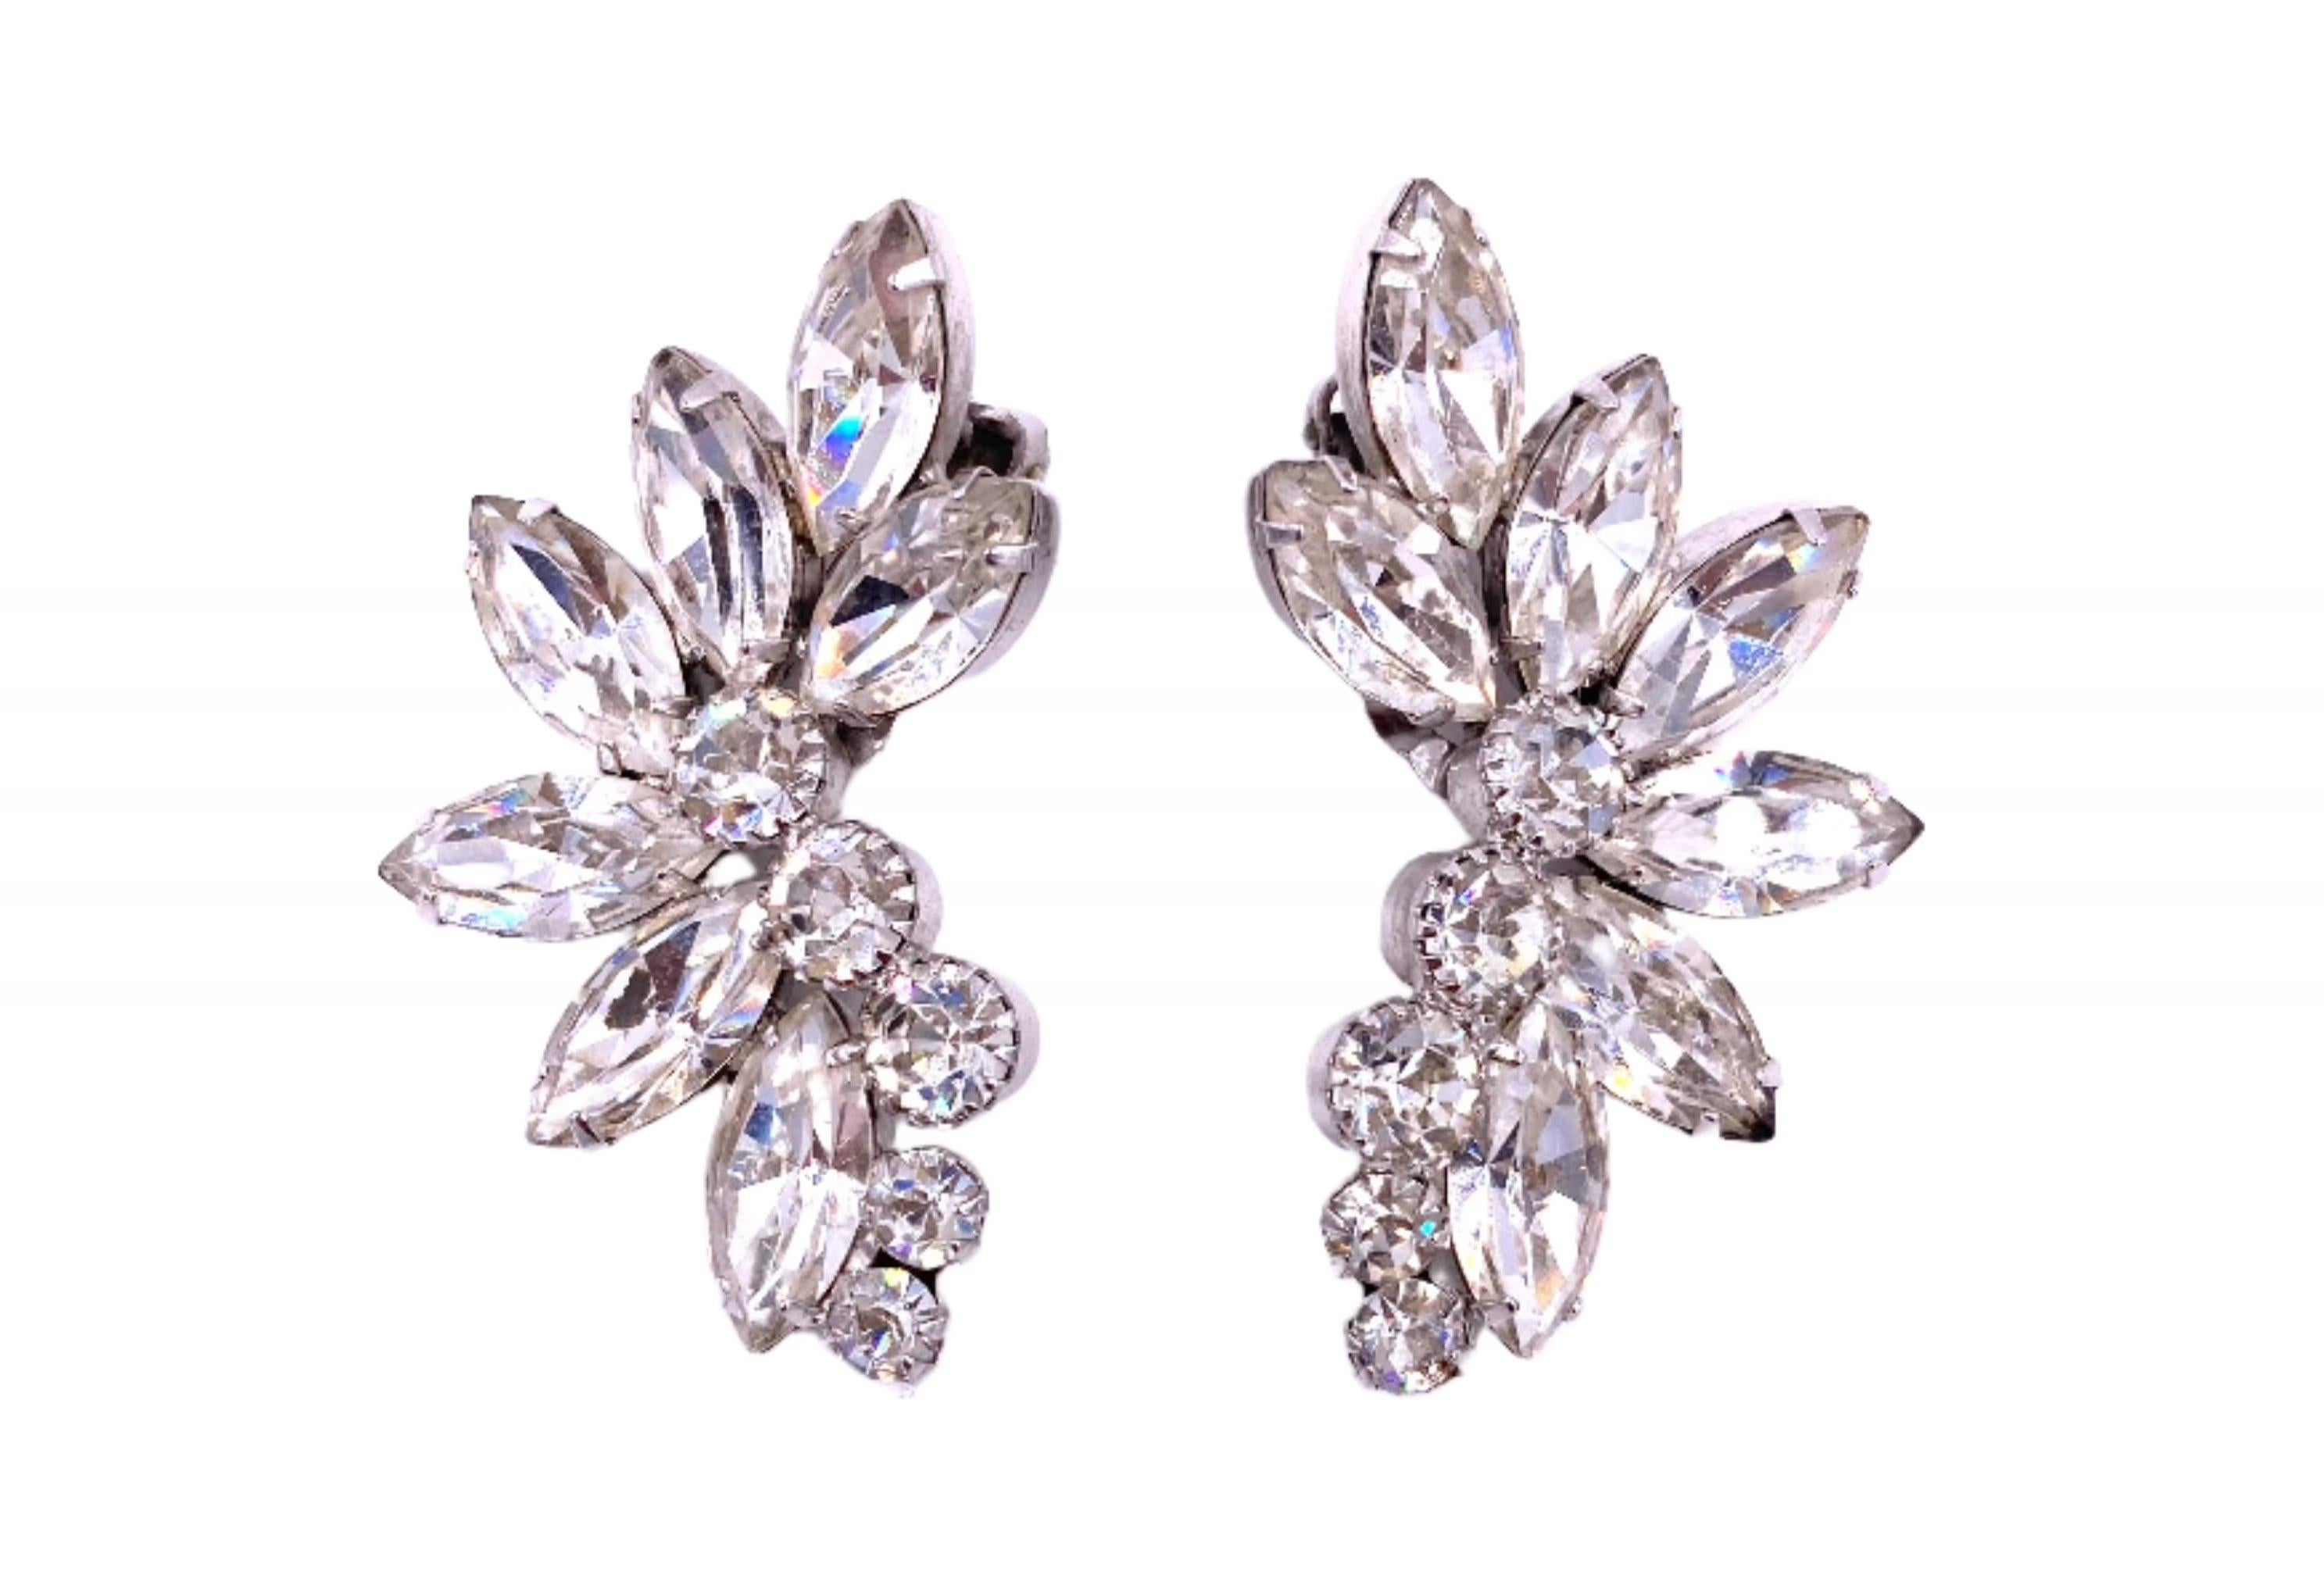 Indulge in vintage elegance with our 1950's Large Crystal Clip-On Earrings. Made with dazzling crystals, these clip-ons exude sophistication and luxury. Add a touch of timeless glamour to any outfit with these exclusive earrings. No piercings? No